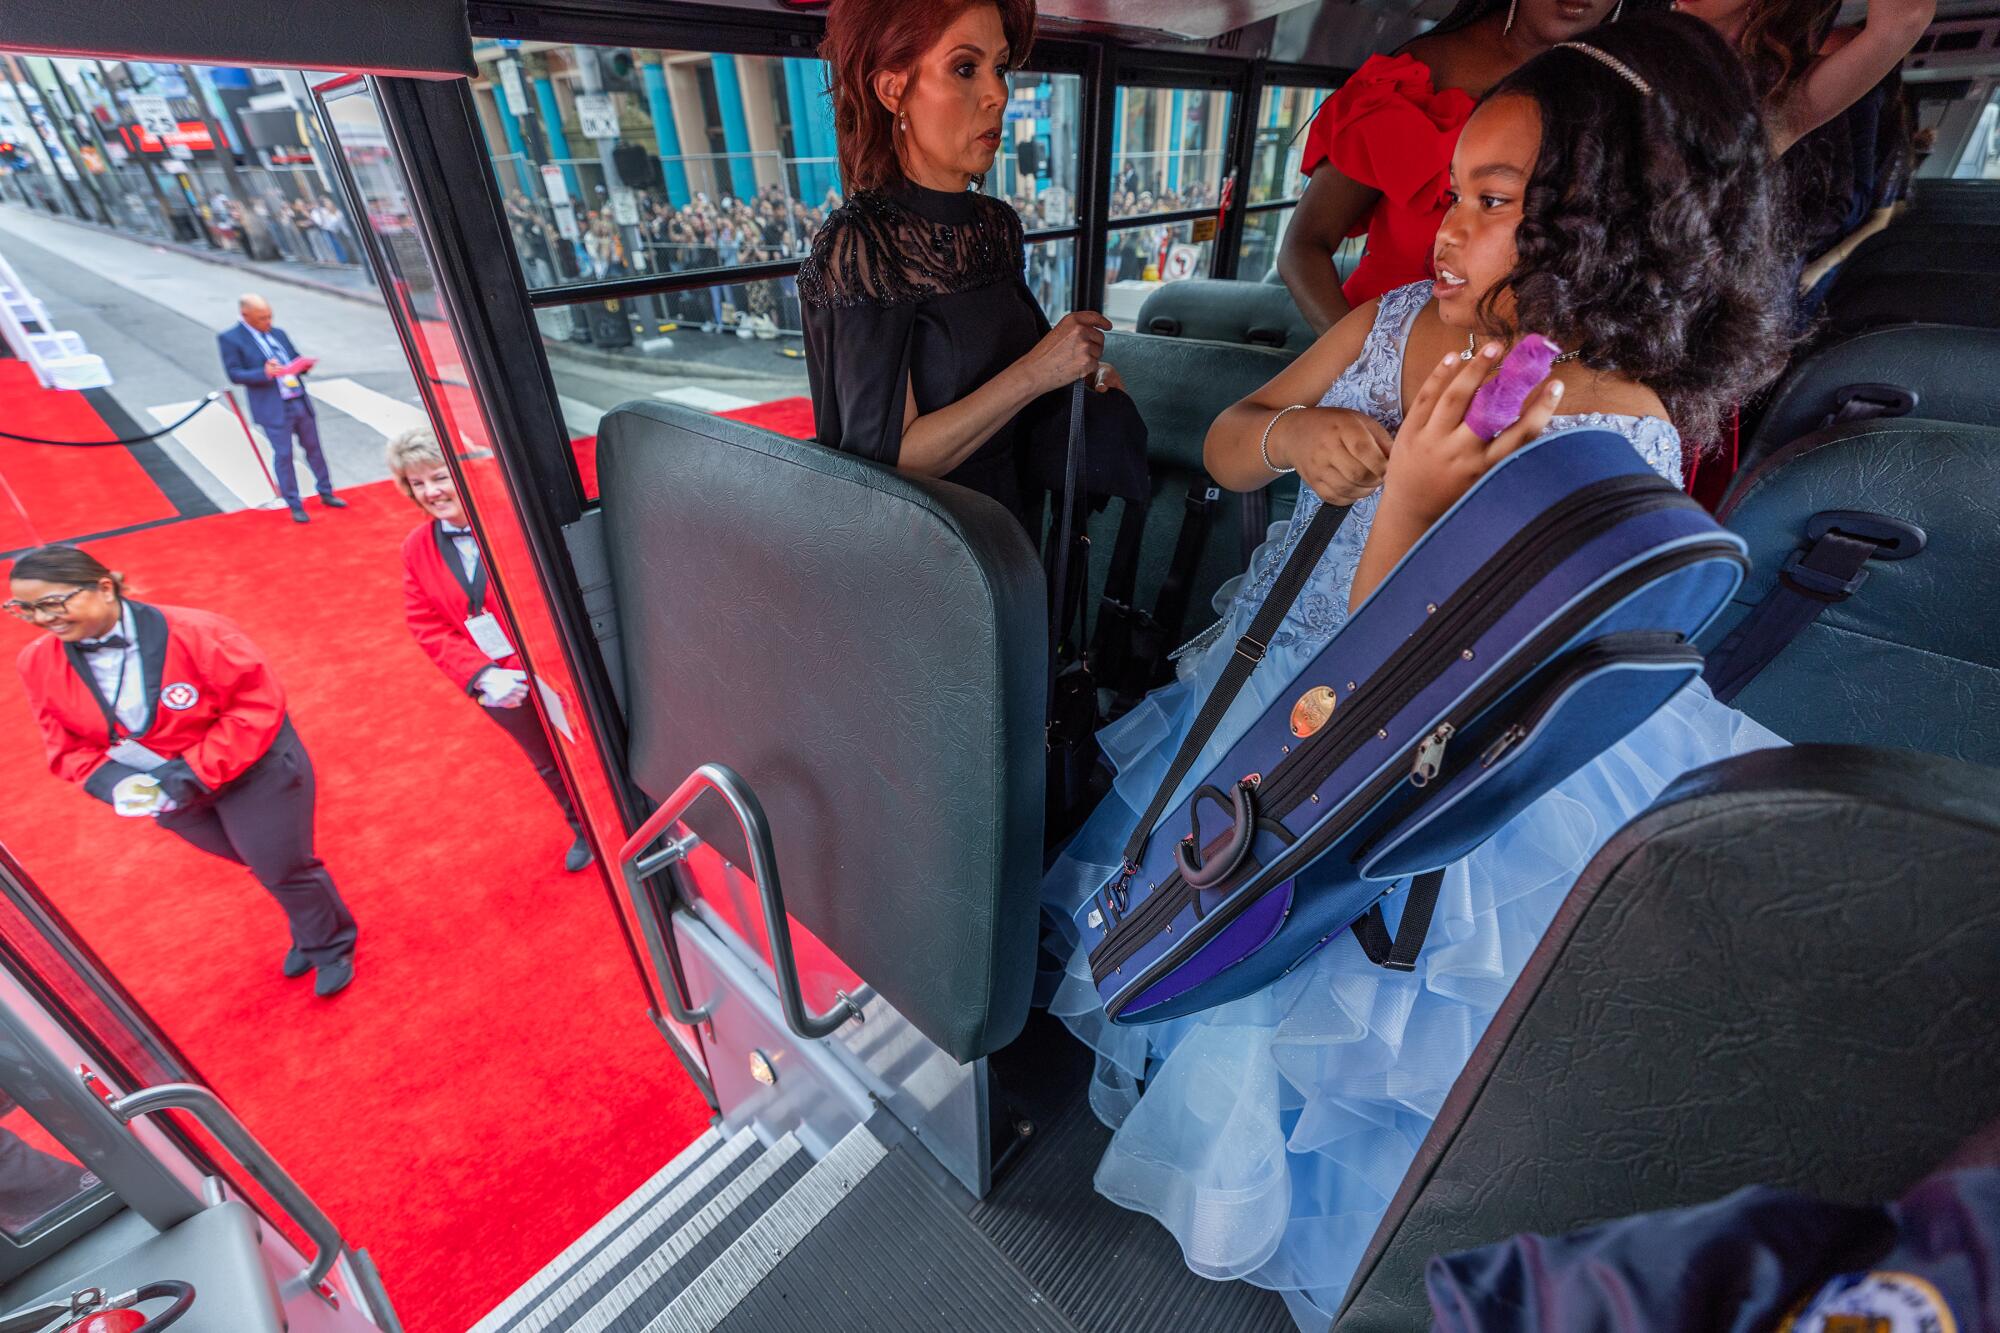 Attendees arrive on the red carpet in a LAUSD school bus at the Oscars.